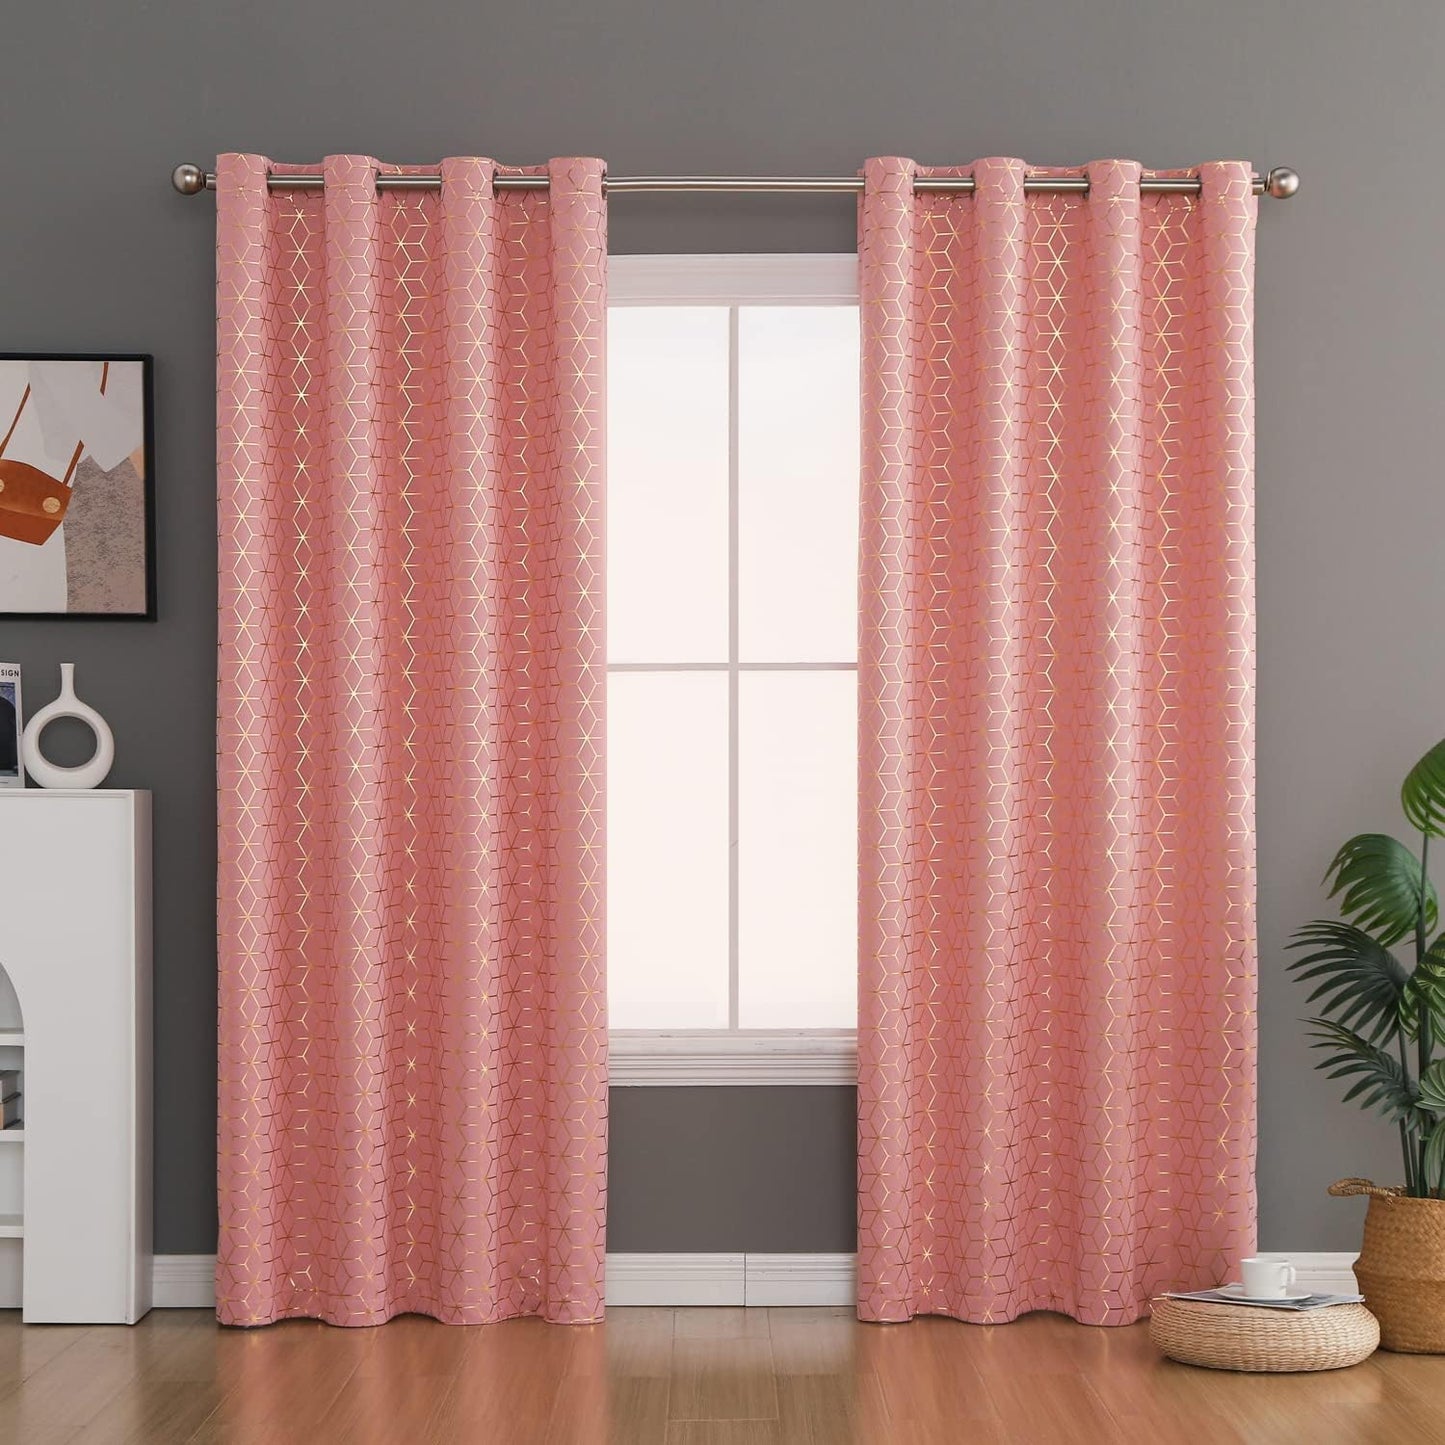 Dreaming Casa Solid Blackout Curtain for Bedroom 96 Inches Long Draperies Window Treatment Black Rod Pocket 2 Panels 52" W X 96" L  Dreaming Casa Pink-Gold Cube 2 X (72"W X 96"L) 